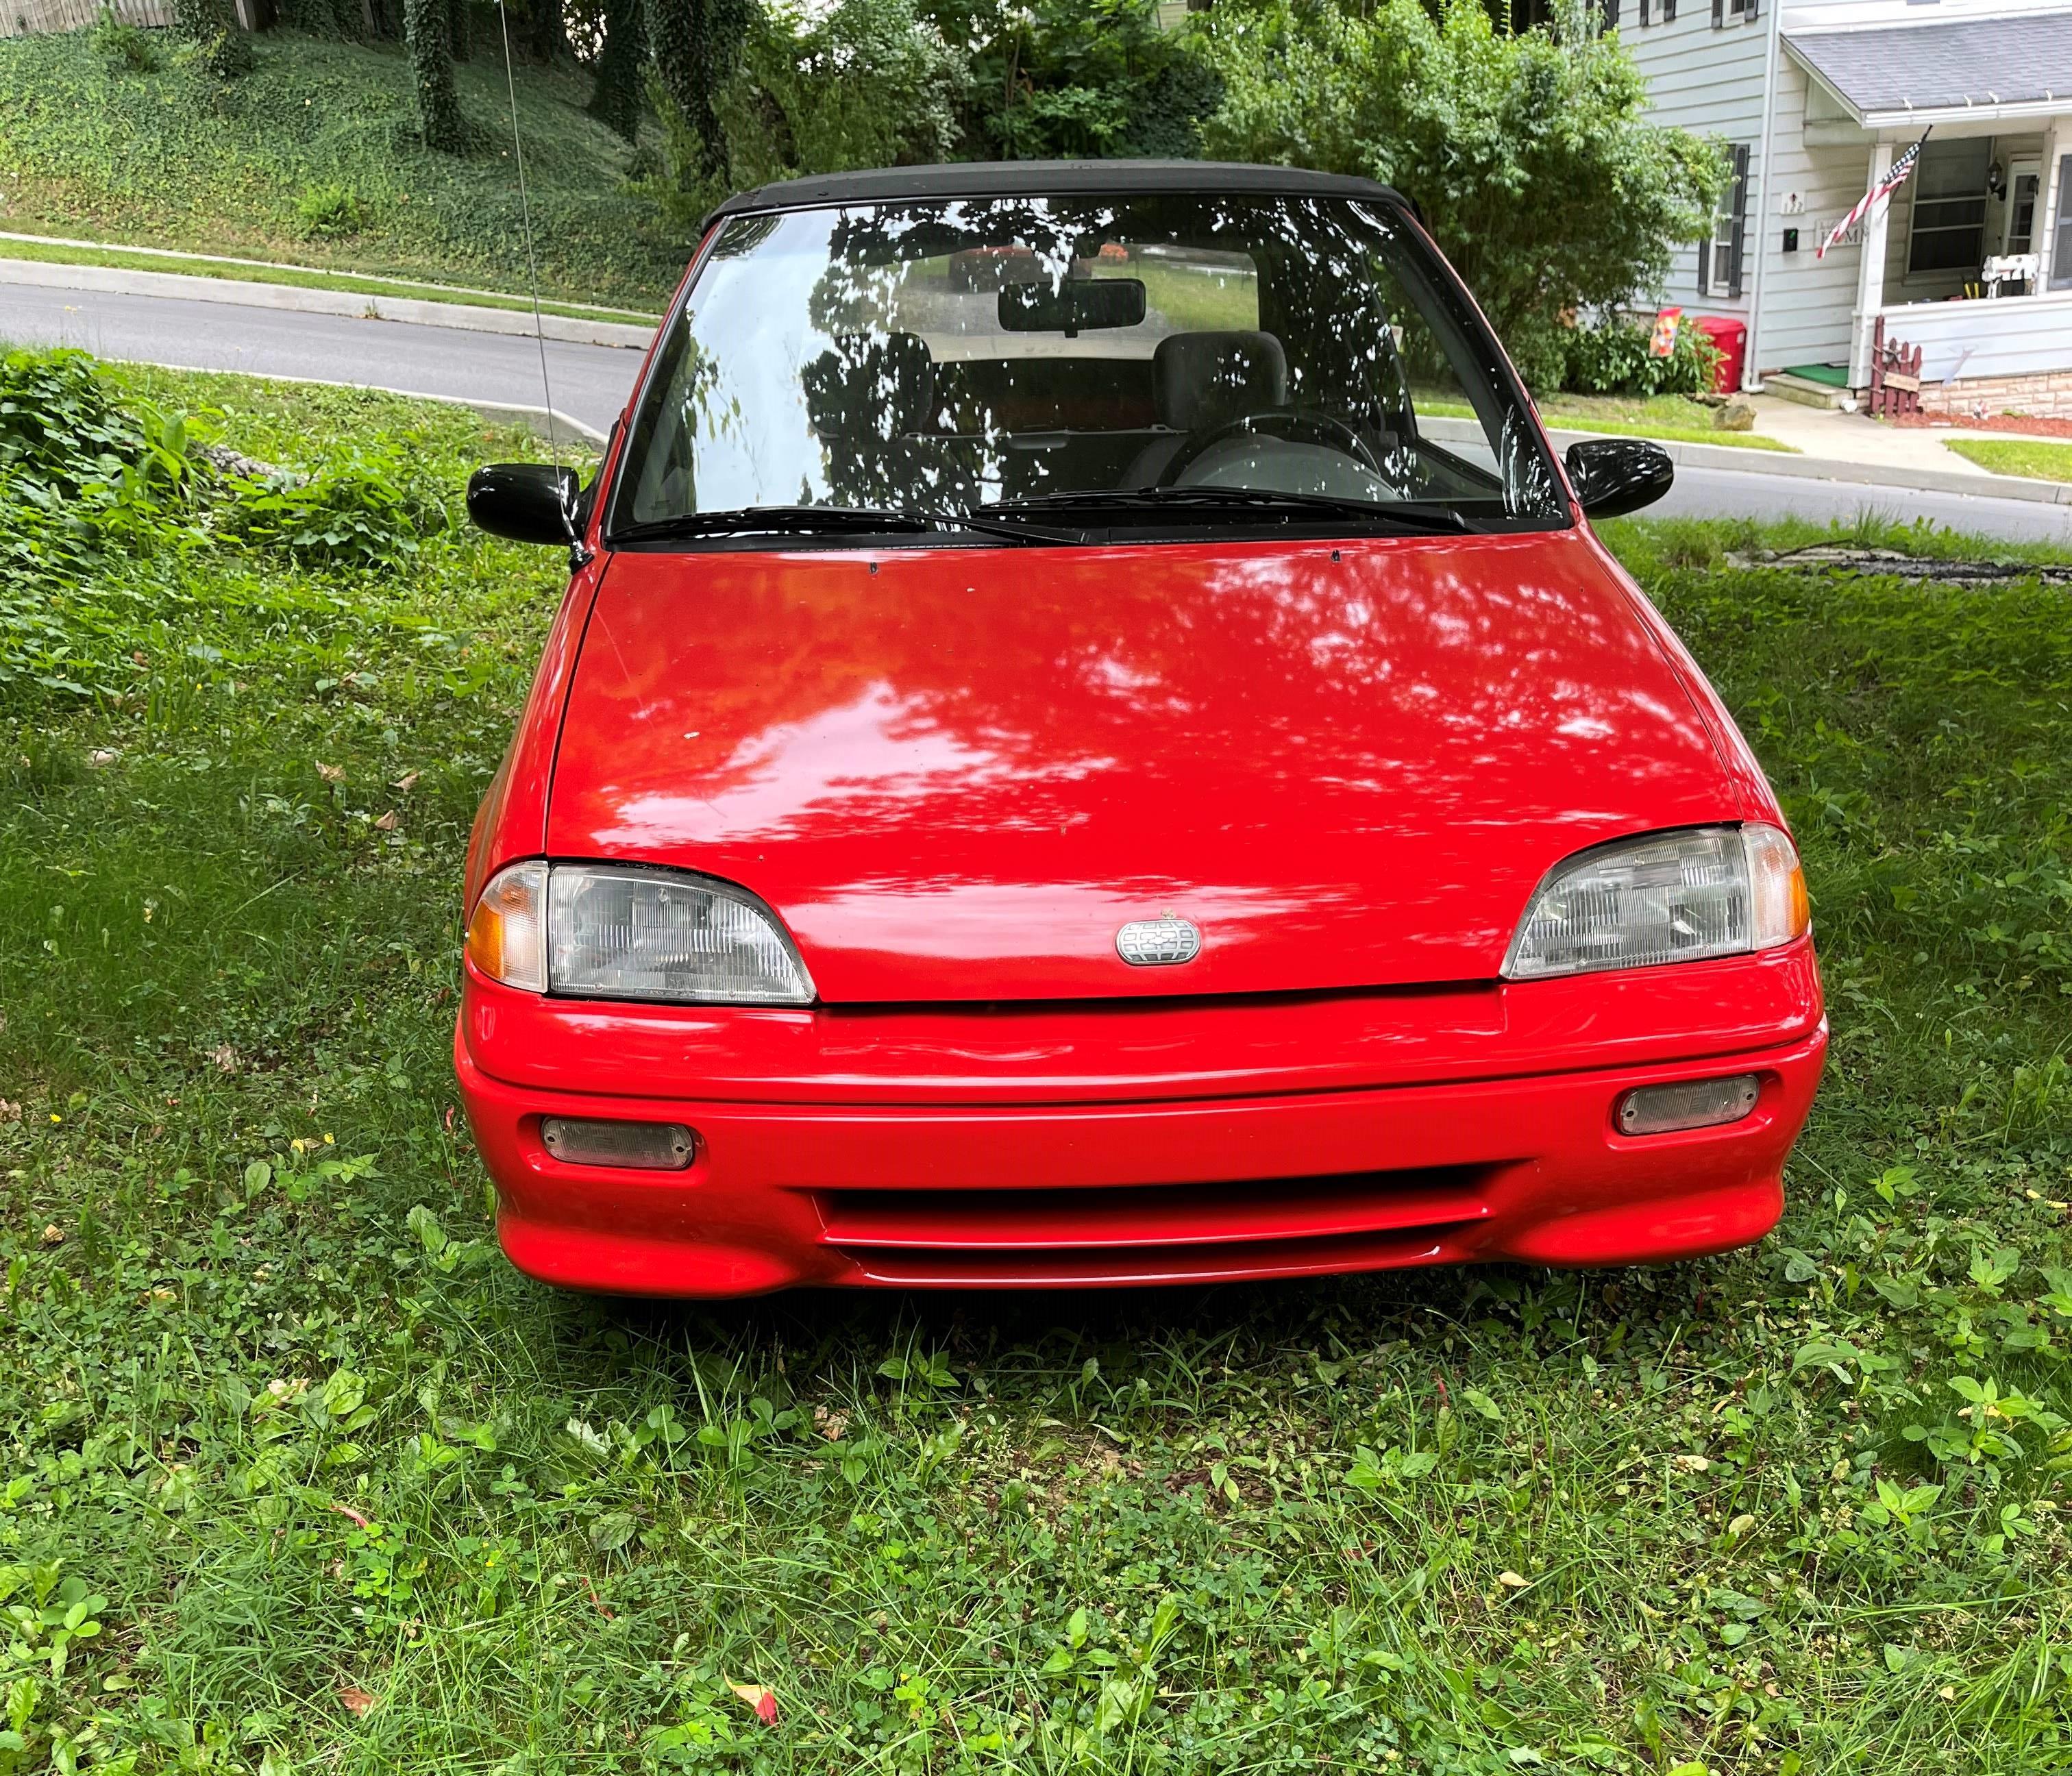 1982 Geo Metro Convertible.Nice little convertible. Automatic and air condi